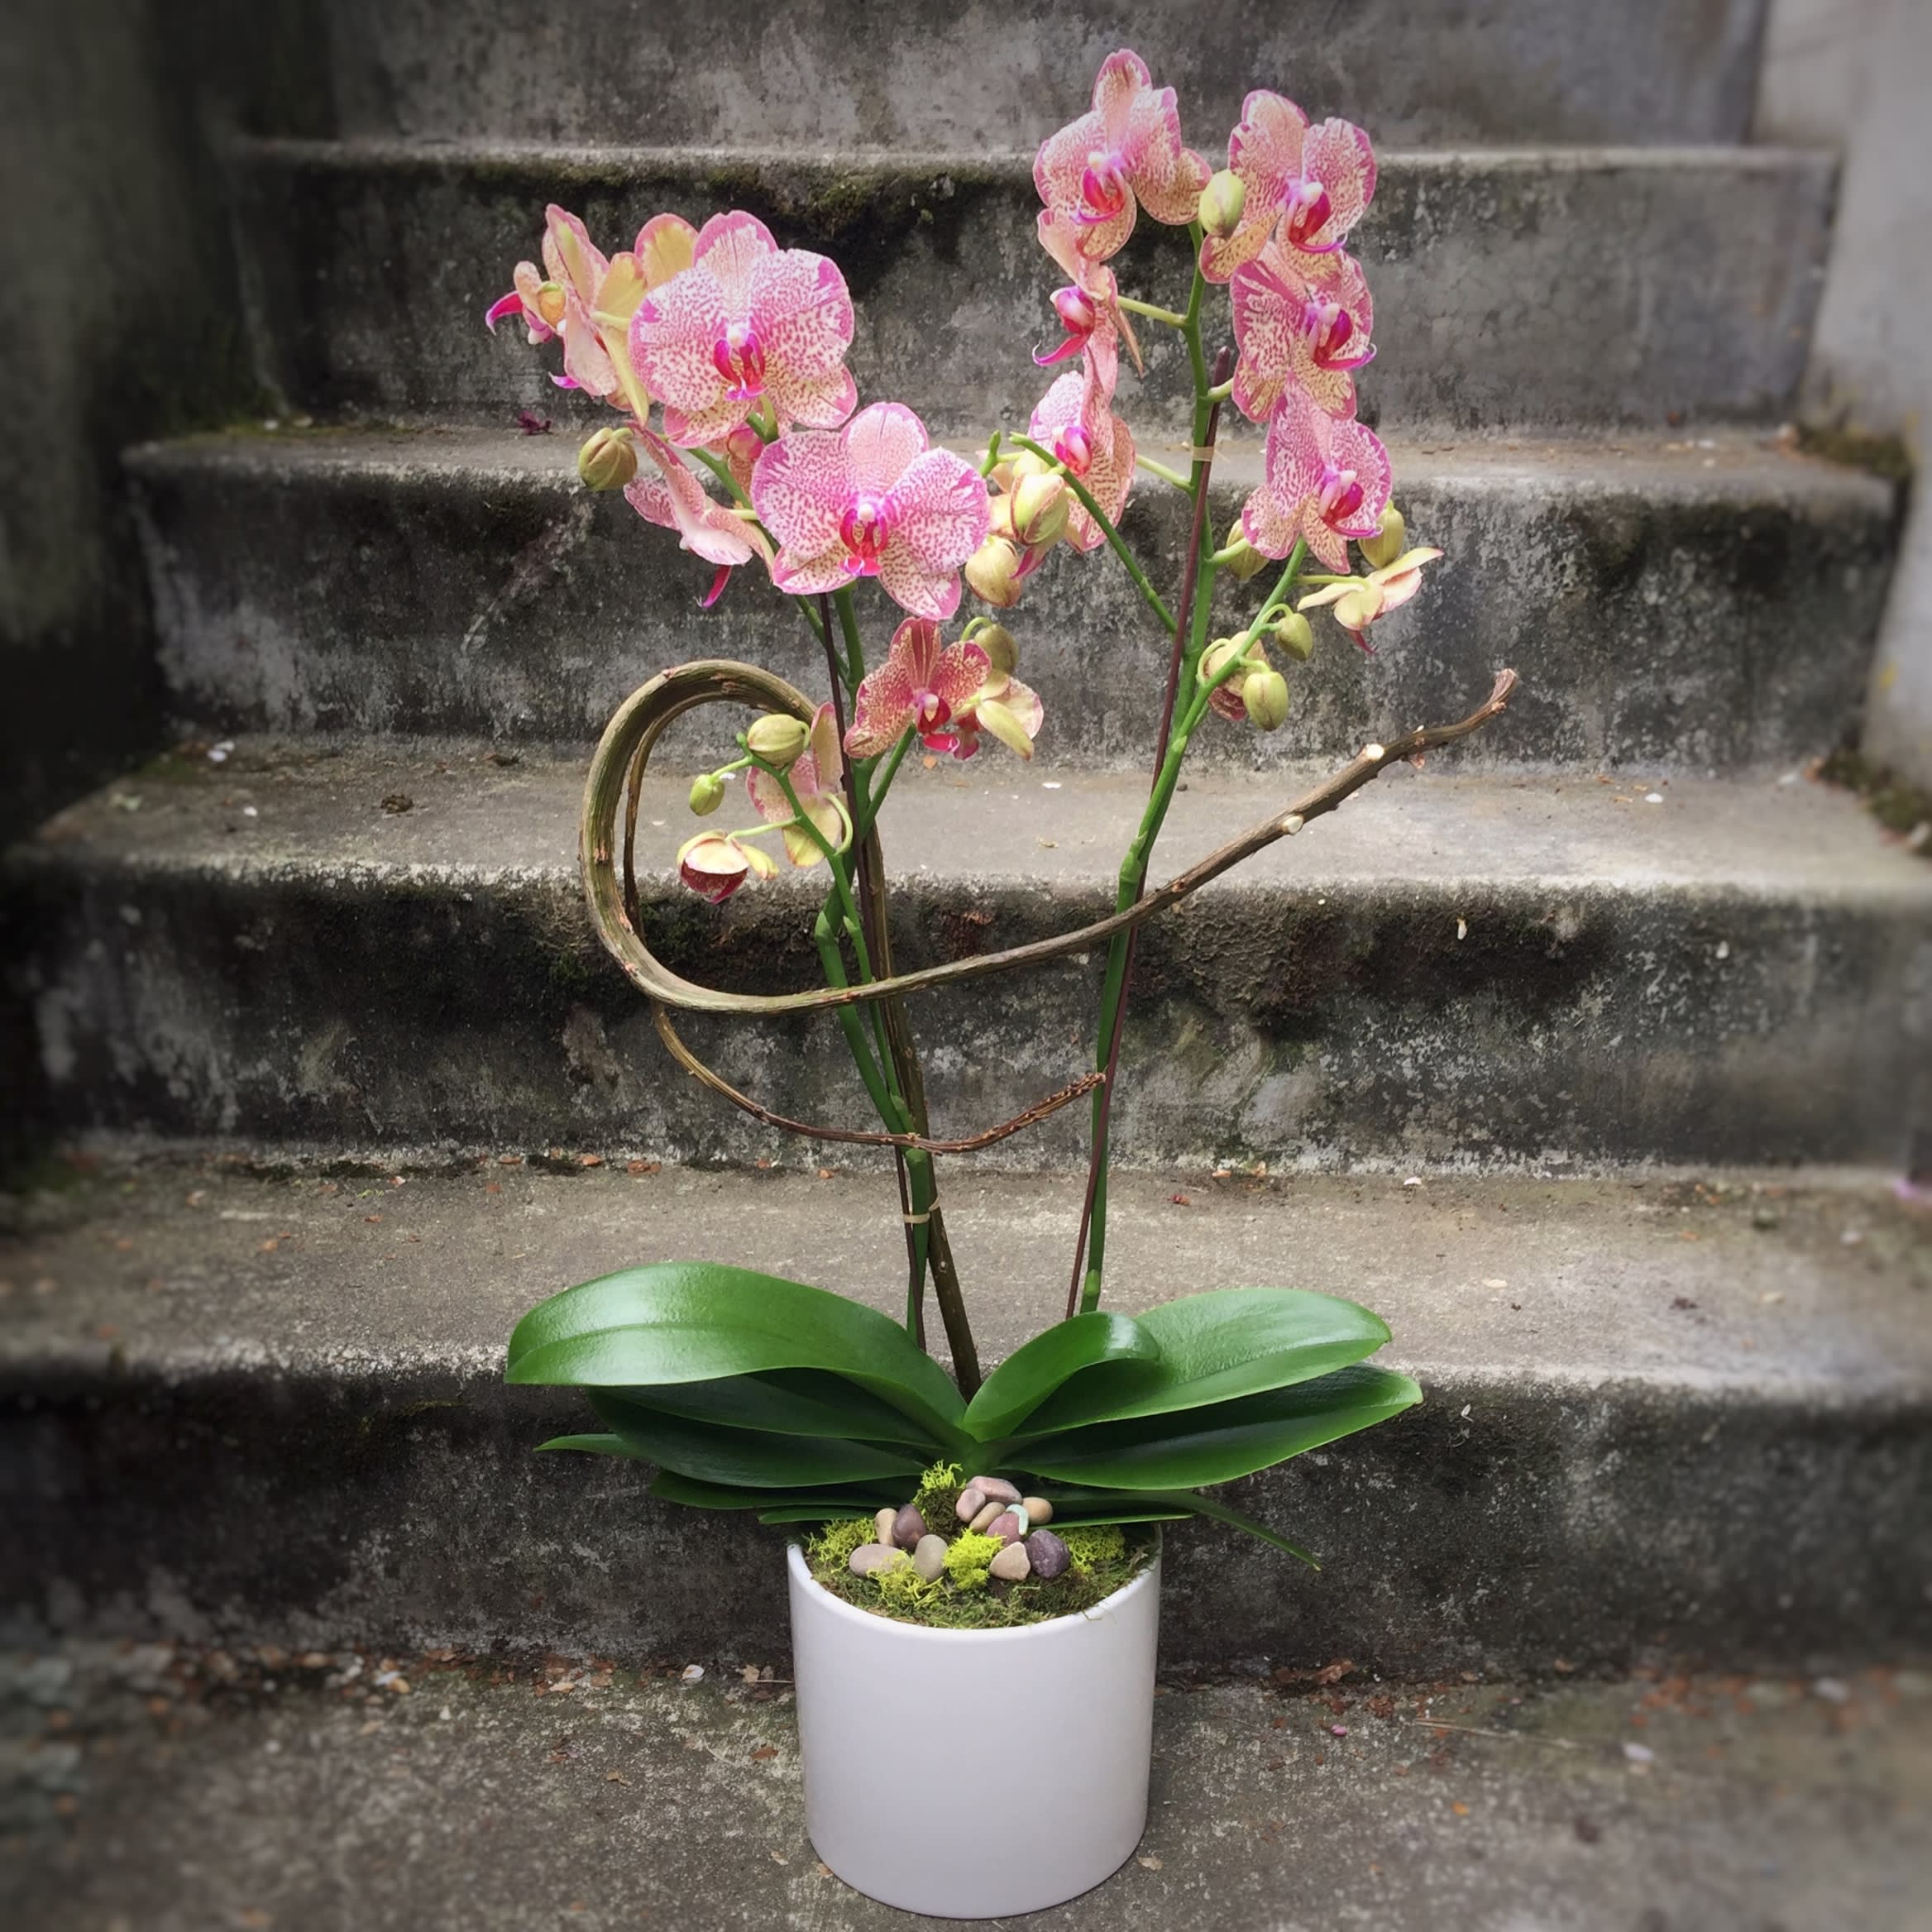 Double Stem Color Phalaenopsis Orchid Plants In Seattle Wa Fiori Floral Design